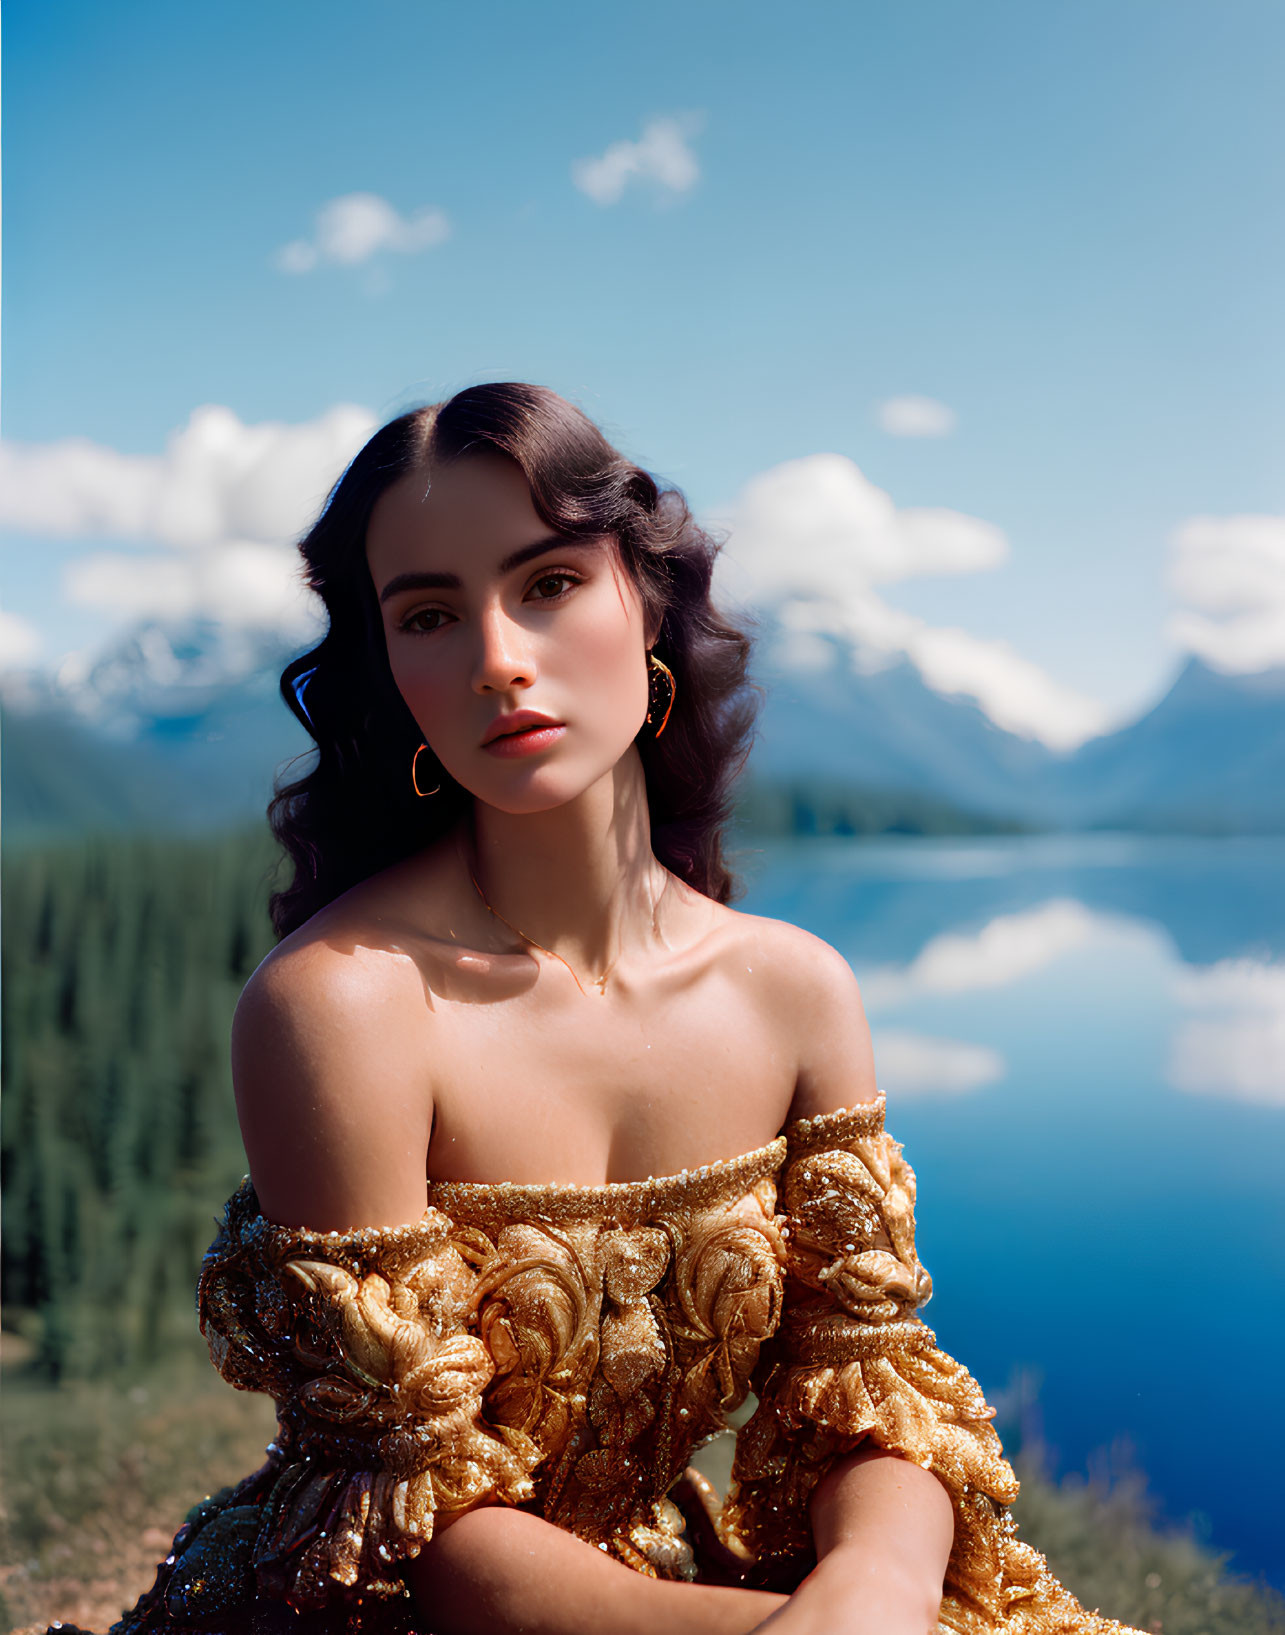 Dark-haired woman in golden off-the-shoulder dress by serene lake and mountains